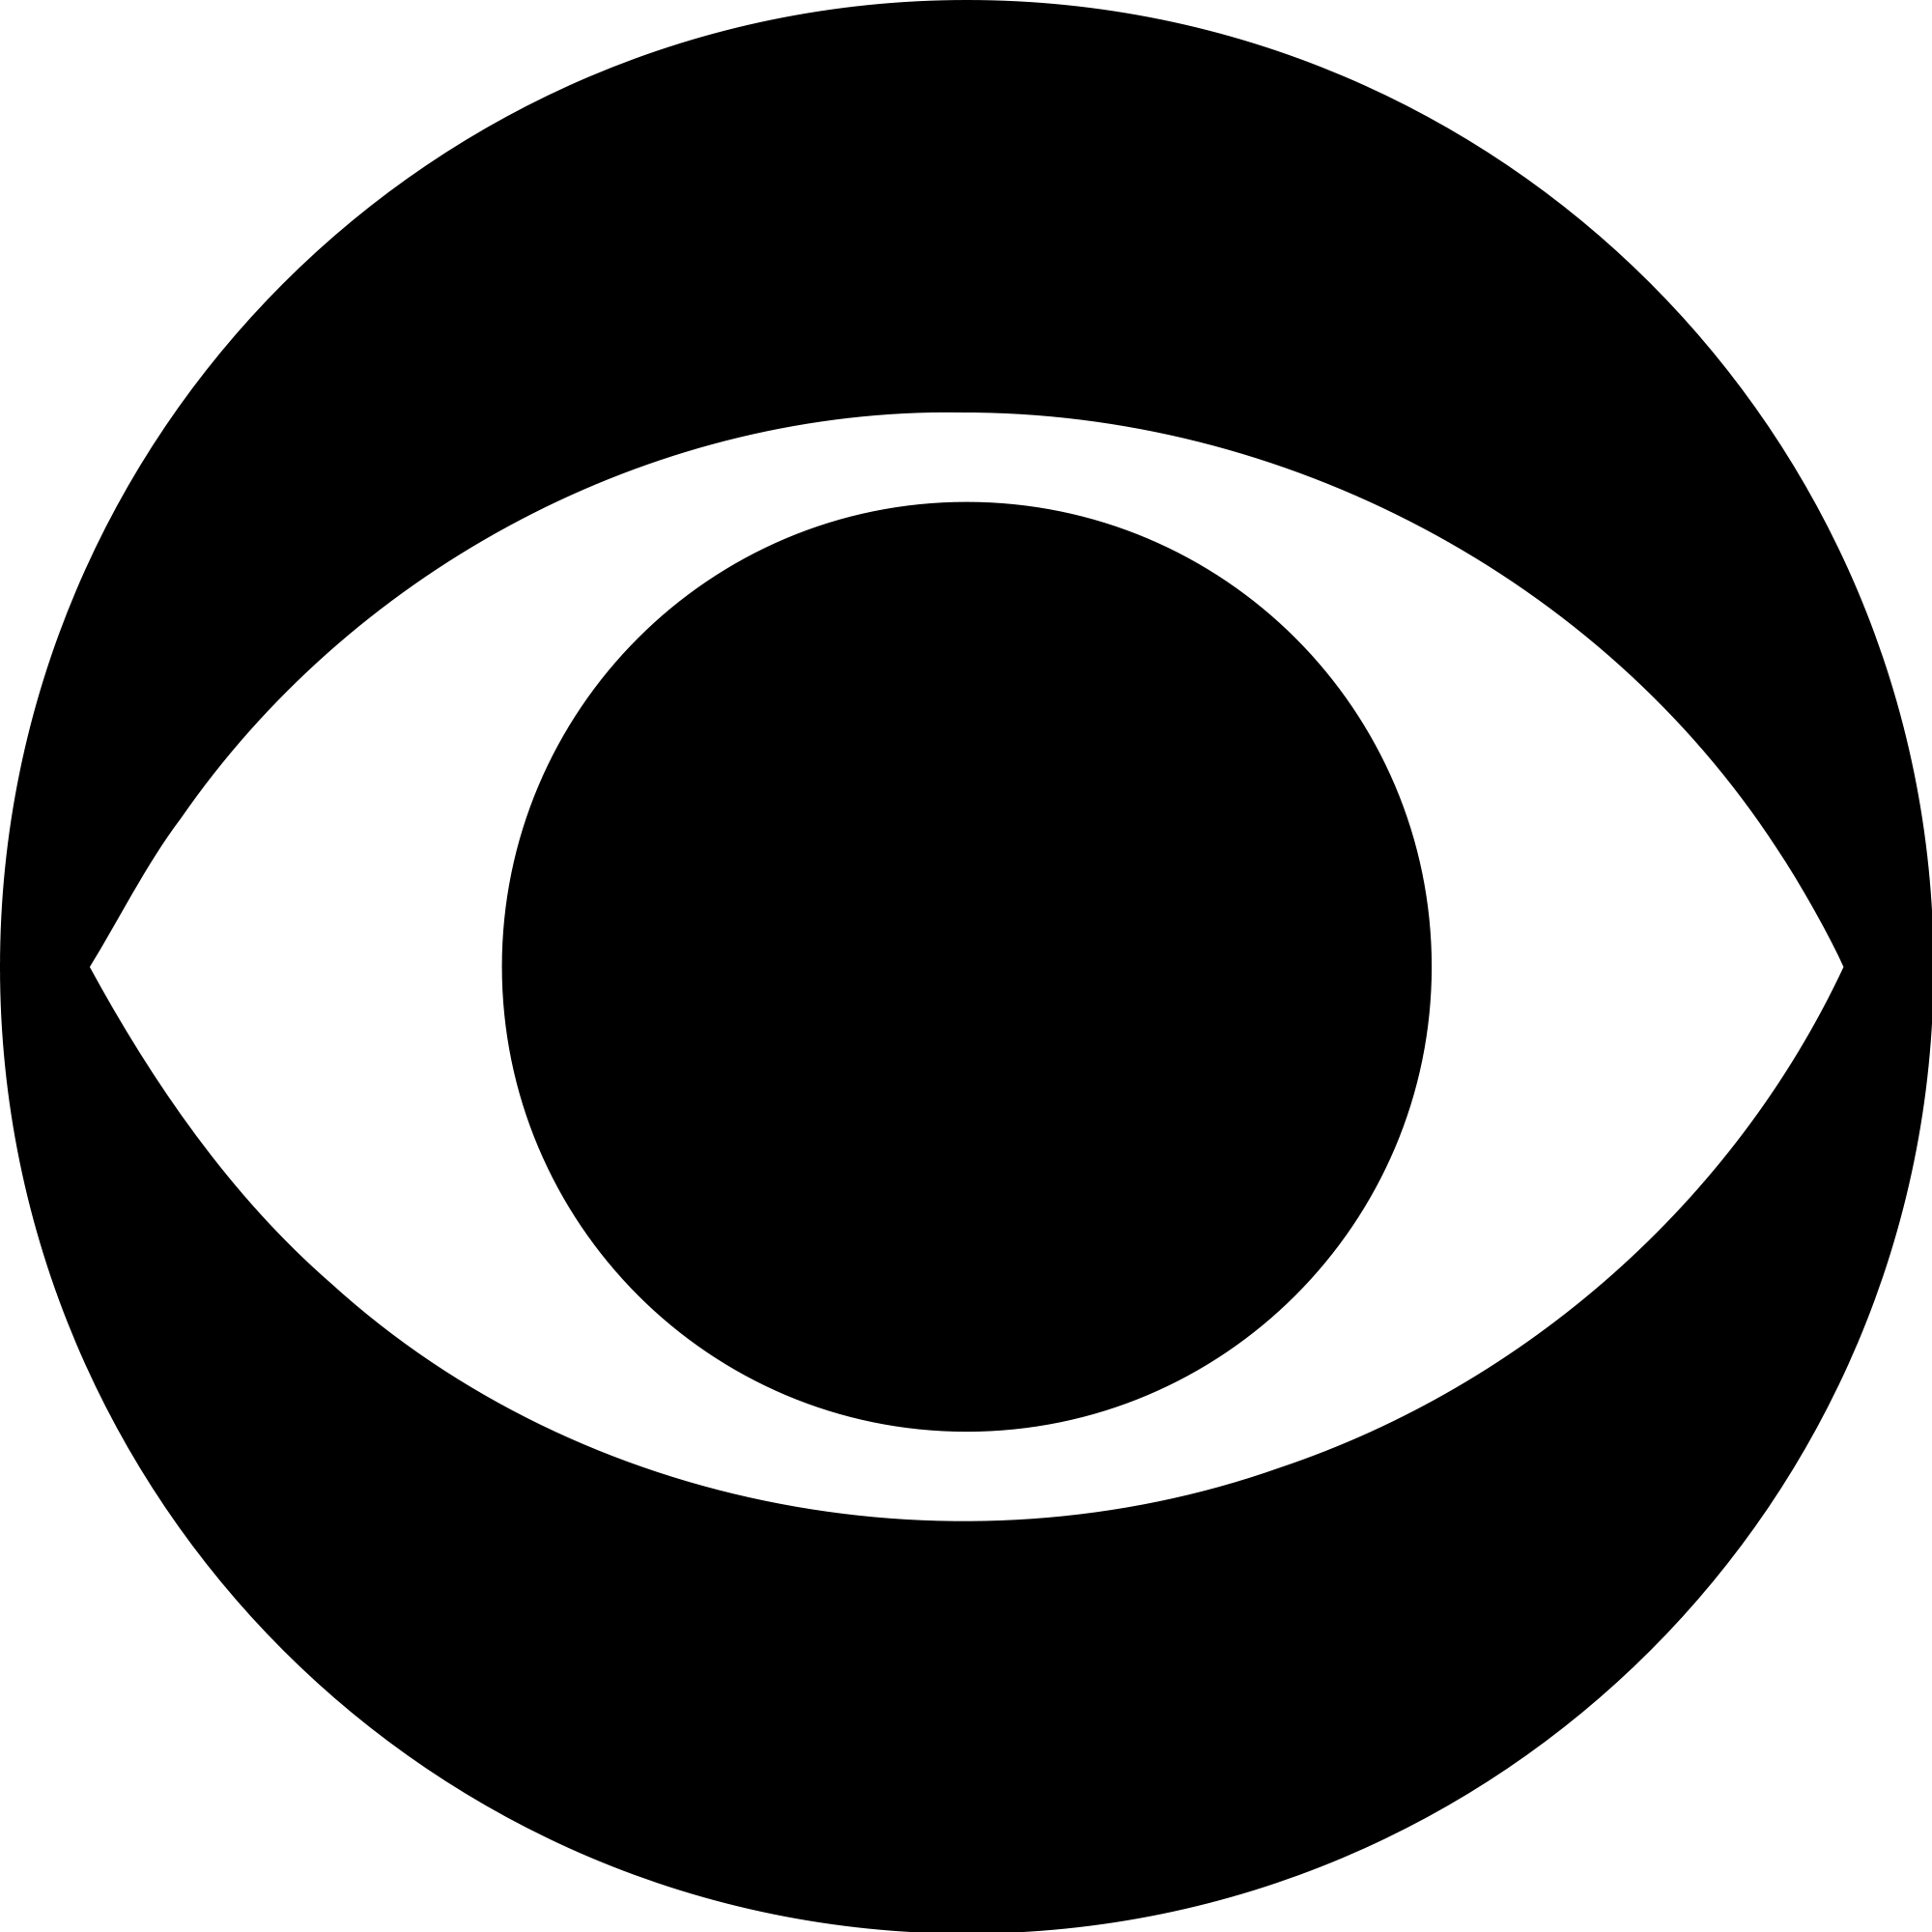 Black Eye Logo - CBS eye logo, 1951. Conceived by William Golden. Still in use today